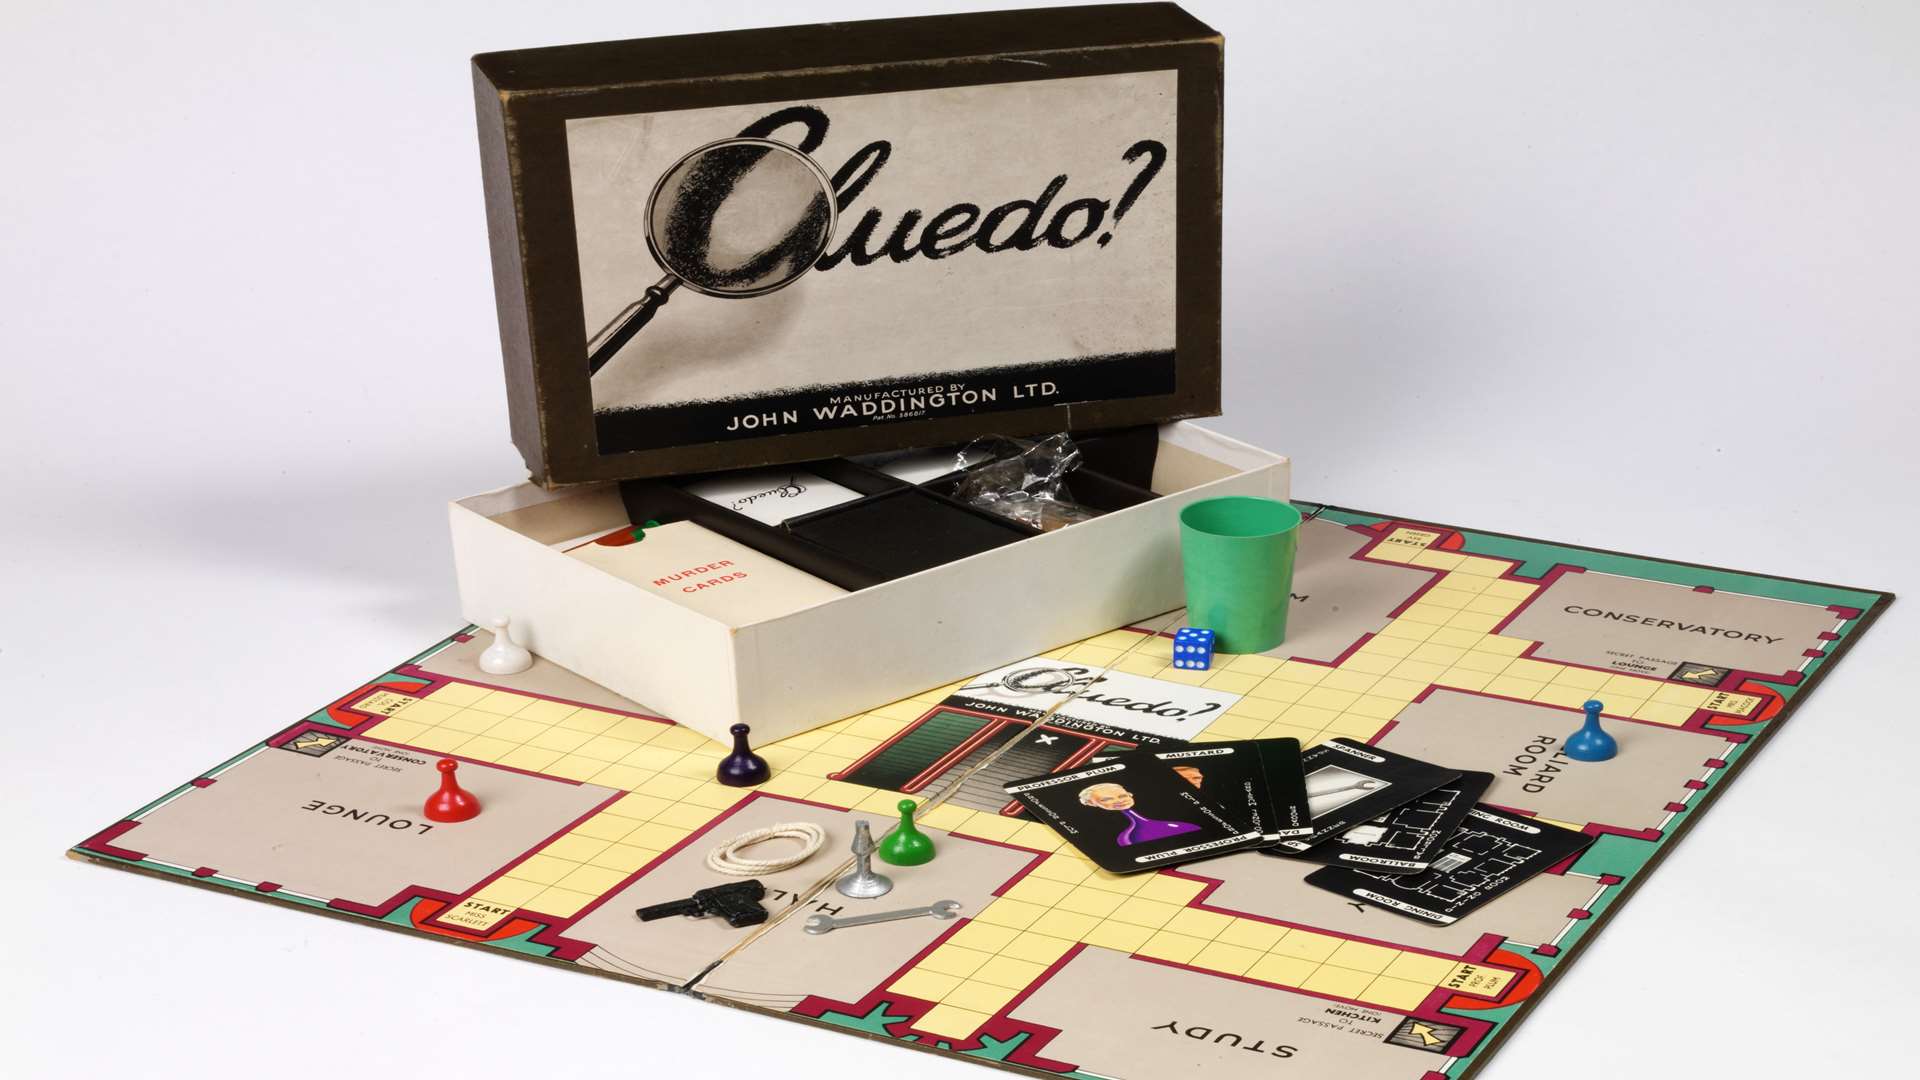 A Cluedo board game from the 1950s